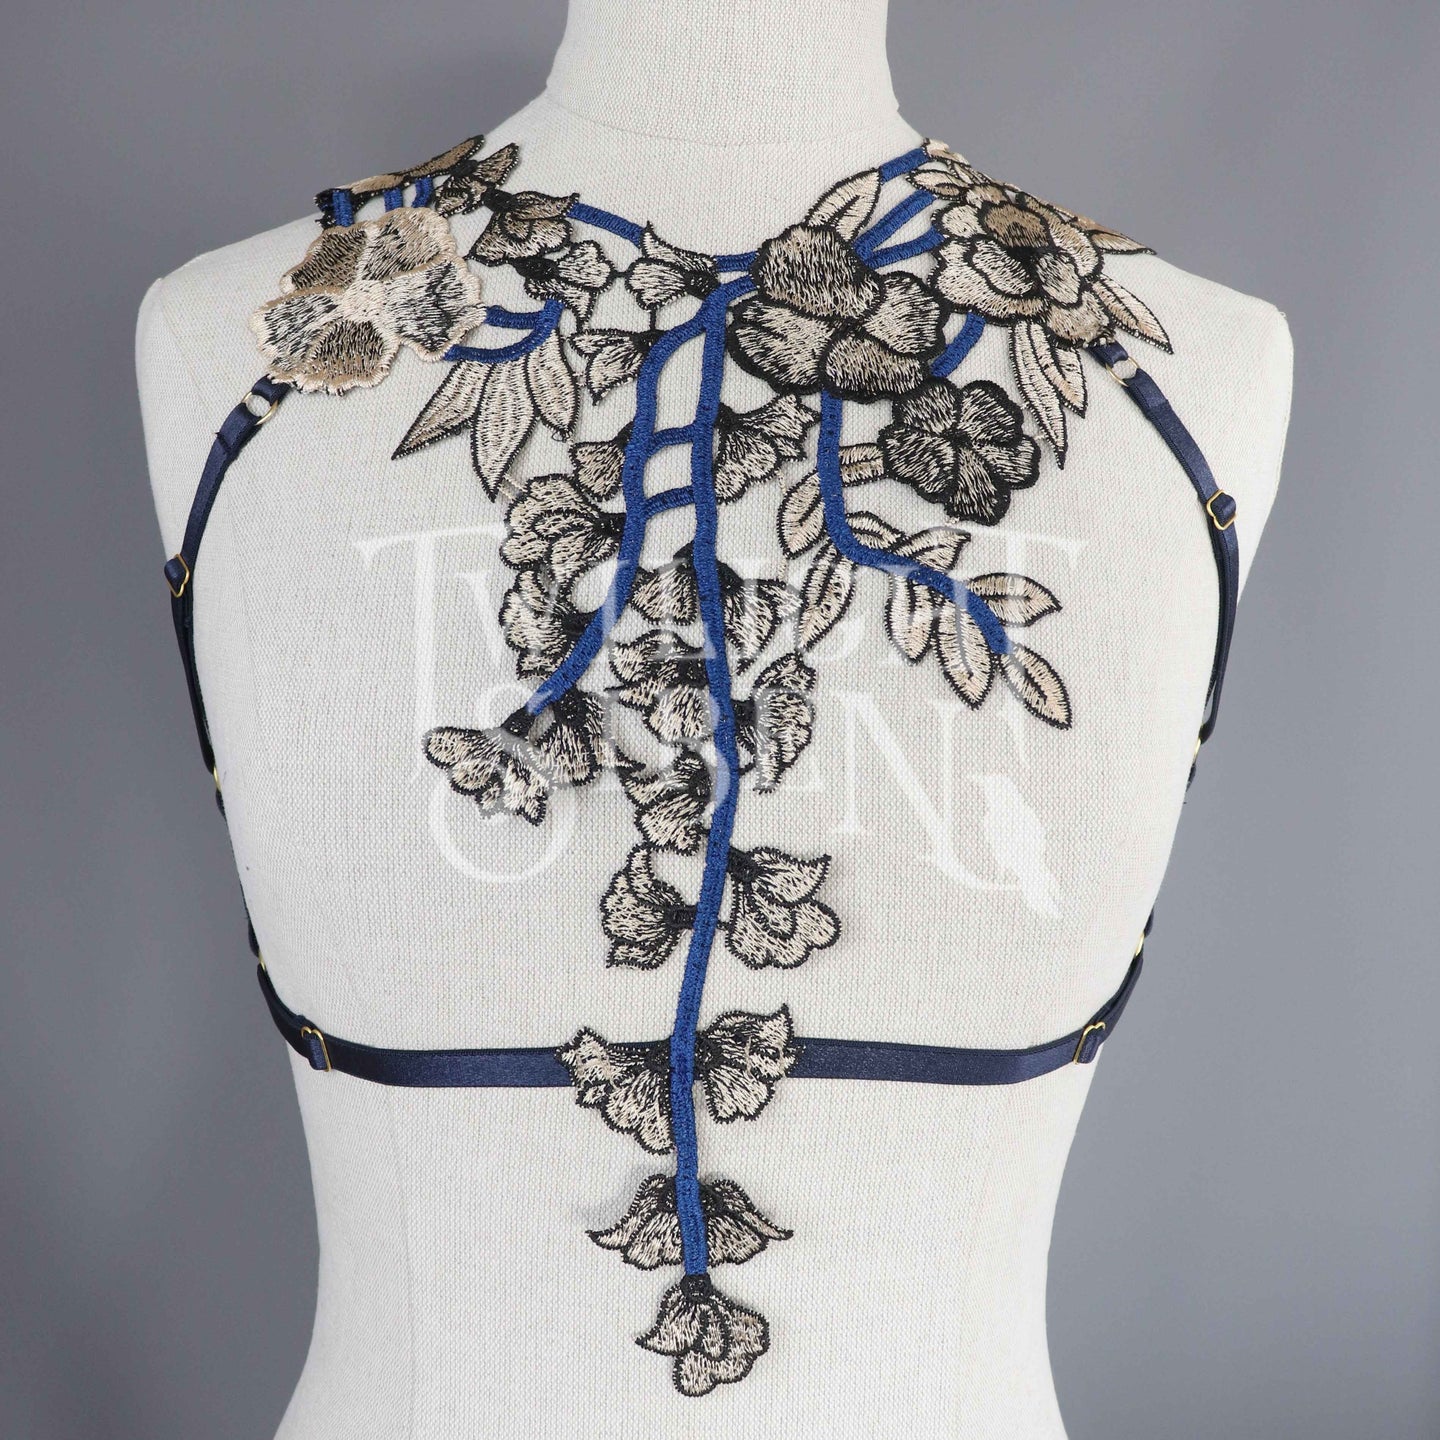 NAVY FLORAL LACE BODY HARNESS BRALET - SIZE - SMALL // UK 8-10 // US 4-6 (FITS UNDERBUST / RIBCAGE UP TO  32